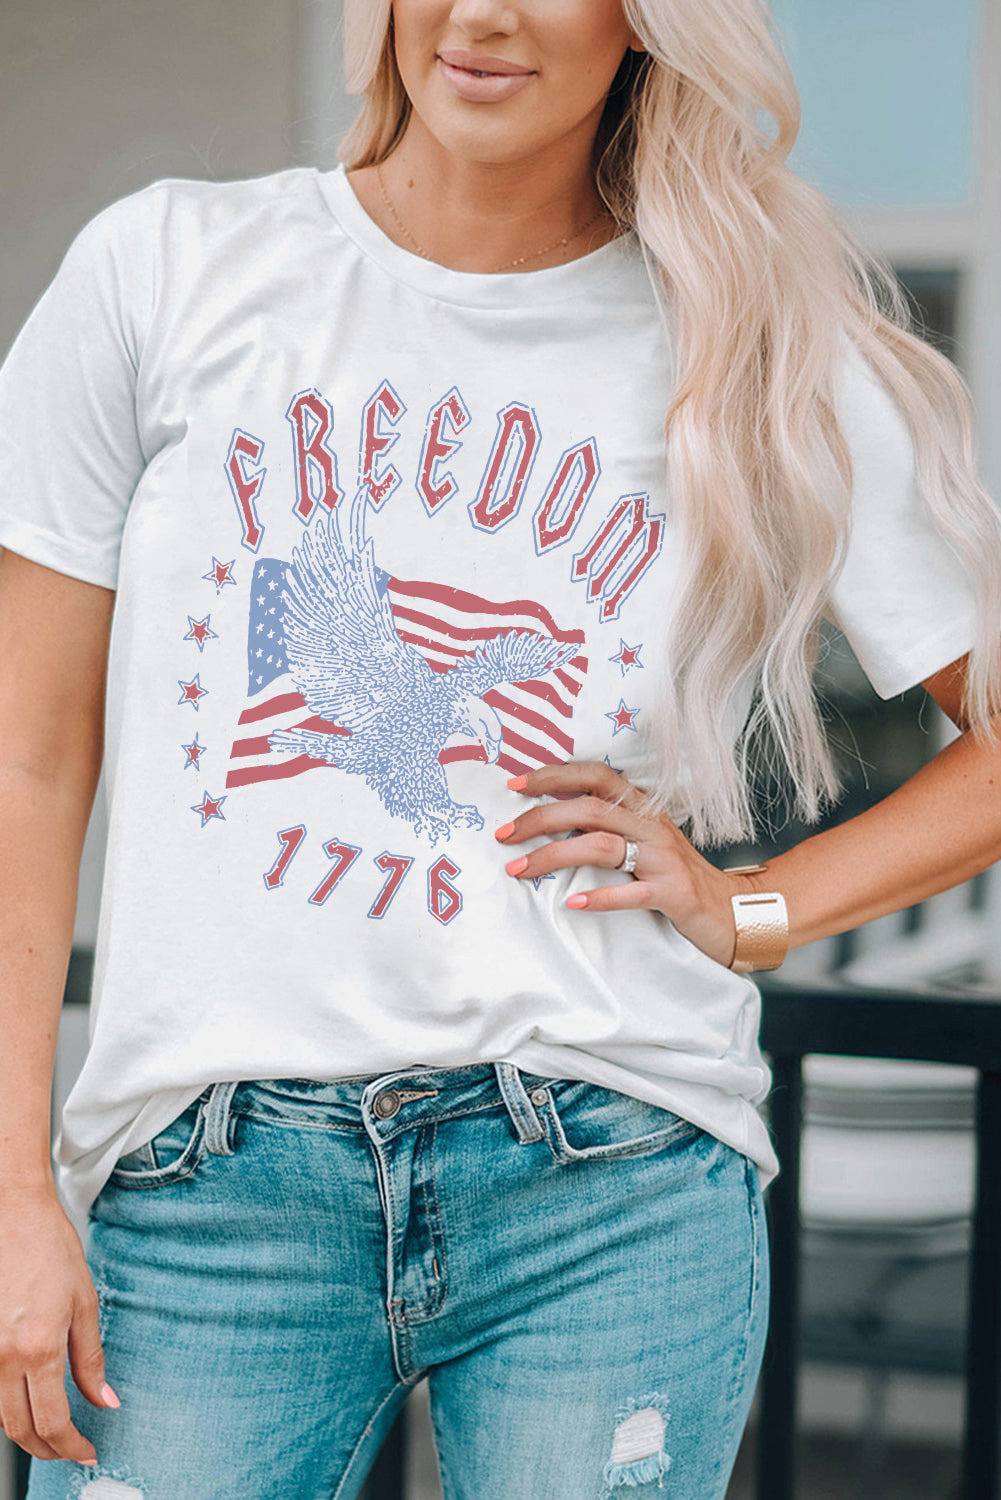 Freedom 1776 Graphic Tee - A Love Letter to Patriotism and Fashion - Wrap Yourself in Sumptuous Comfort - Guy Christopher